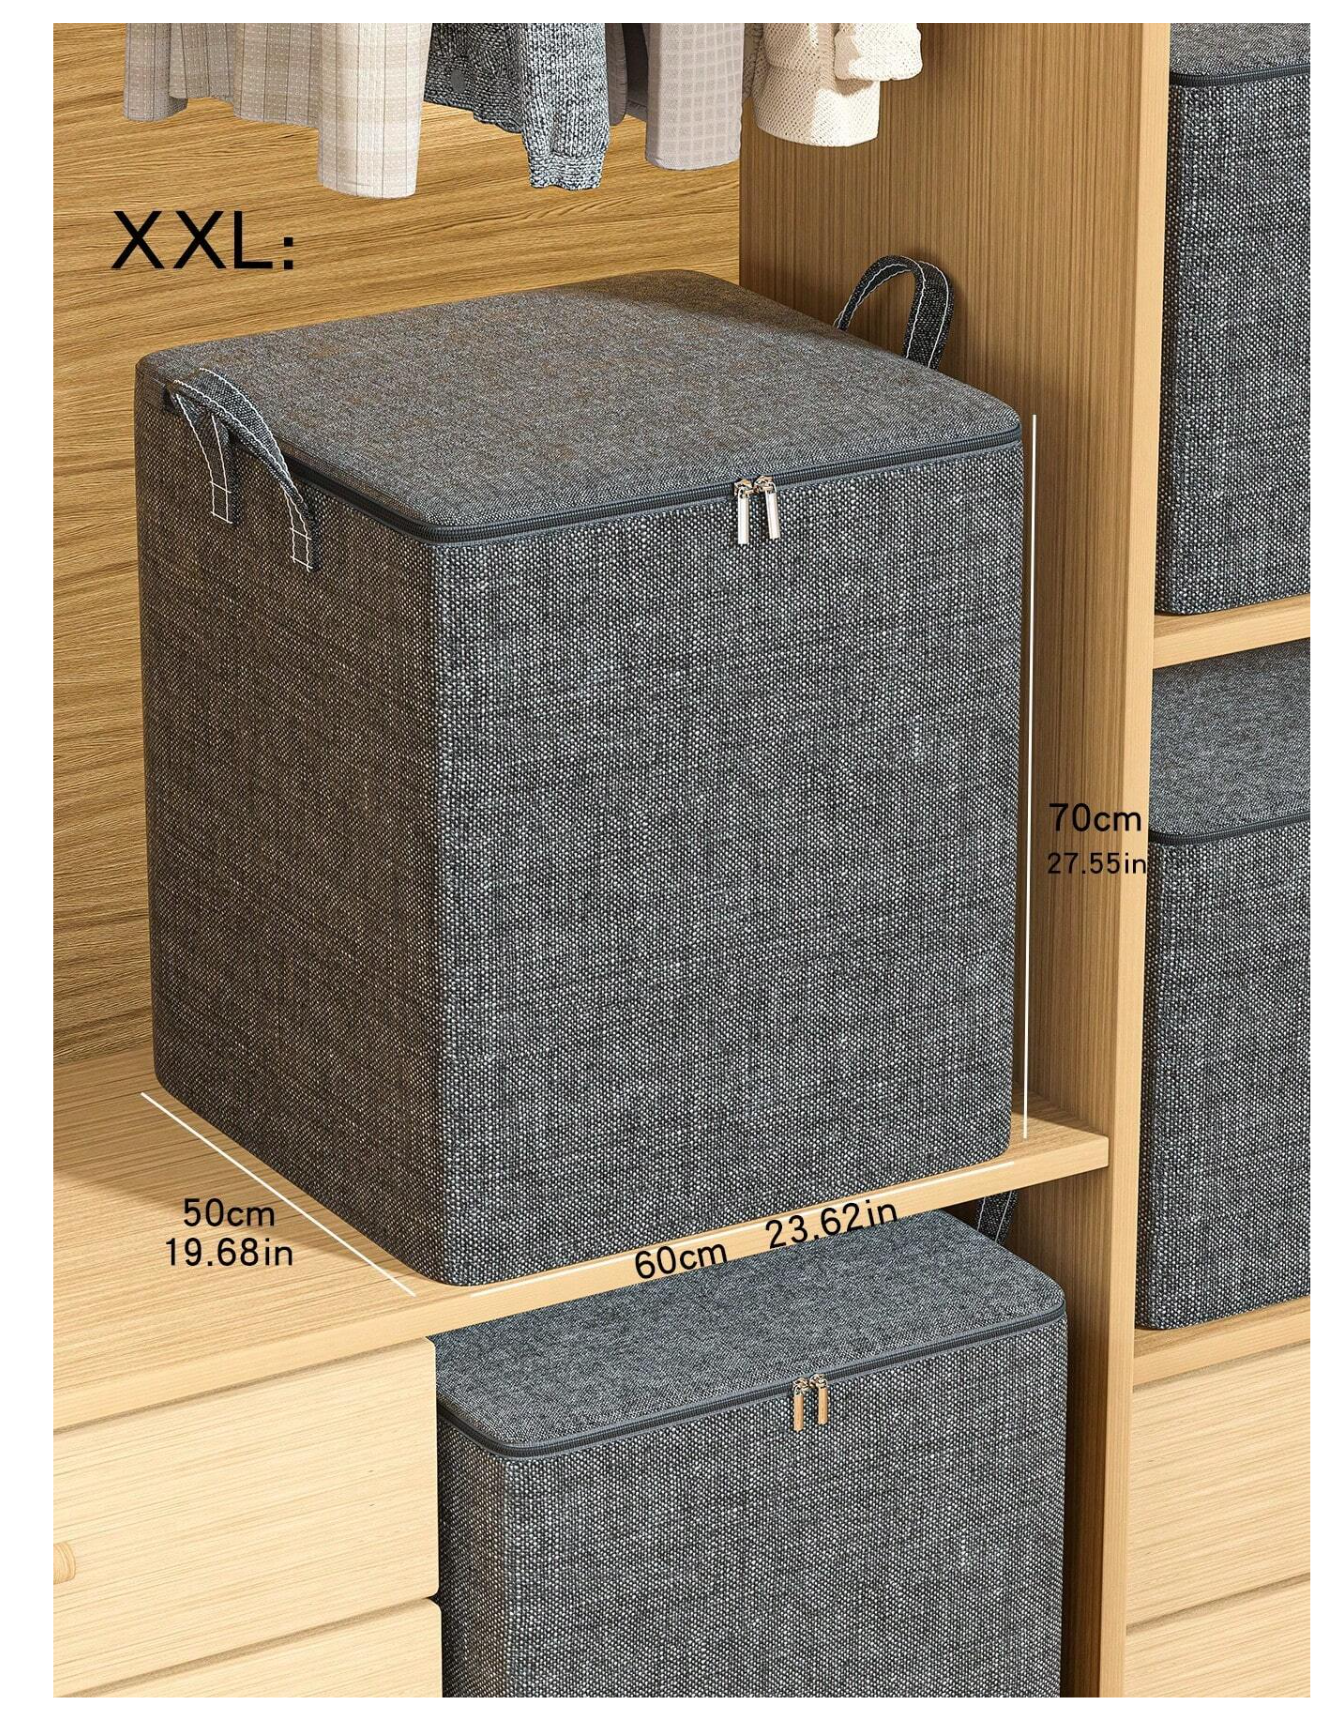 Zip, Fold, Organize: 1PC Cationic Zipper Storage Bag – Your Stylish Solution for Home Storage and Organization!